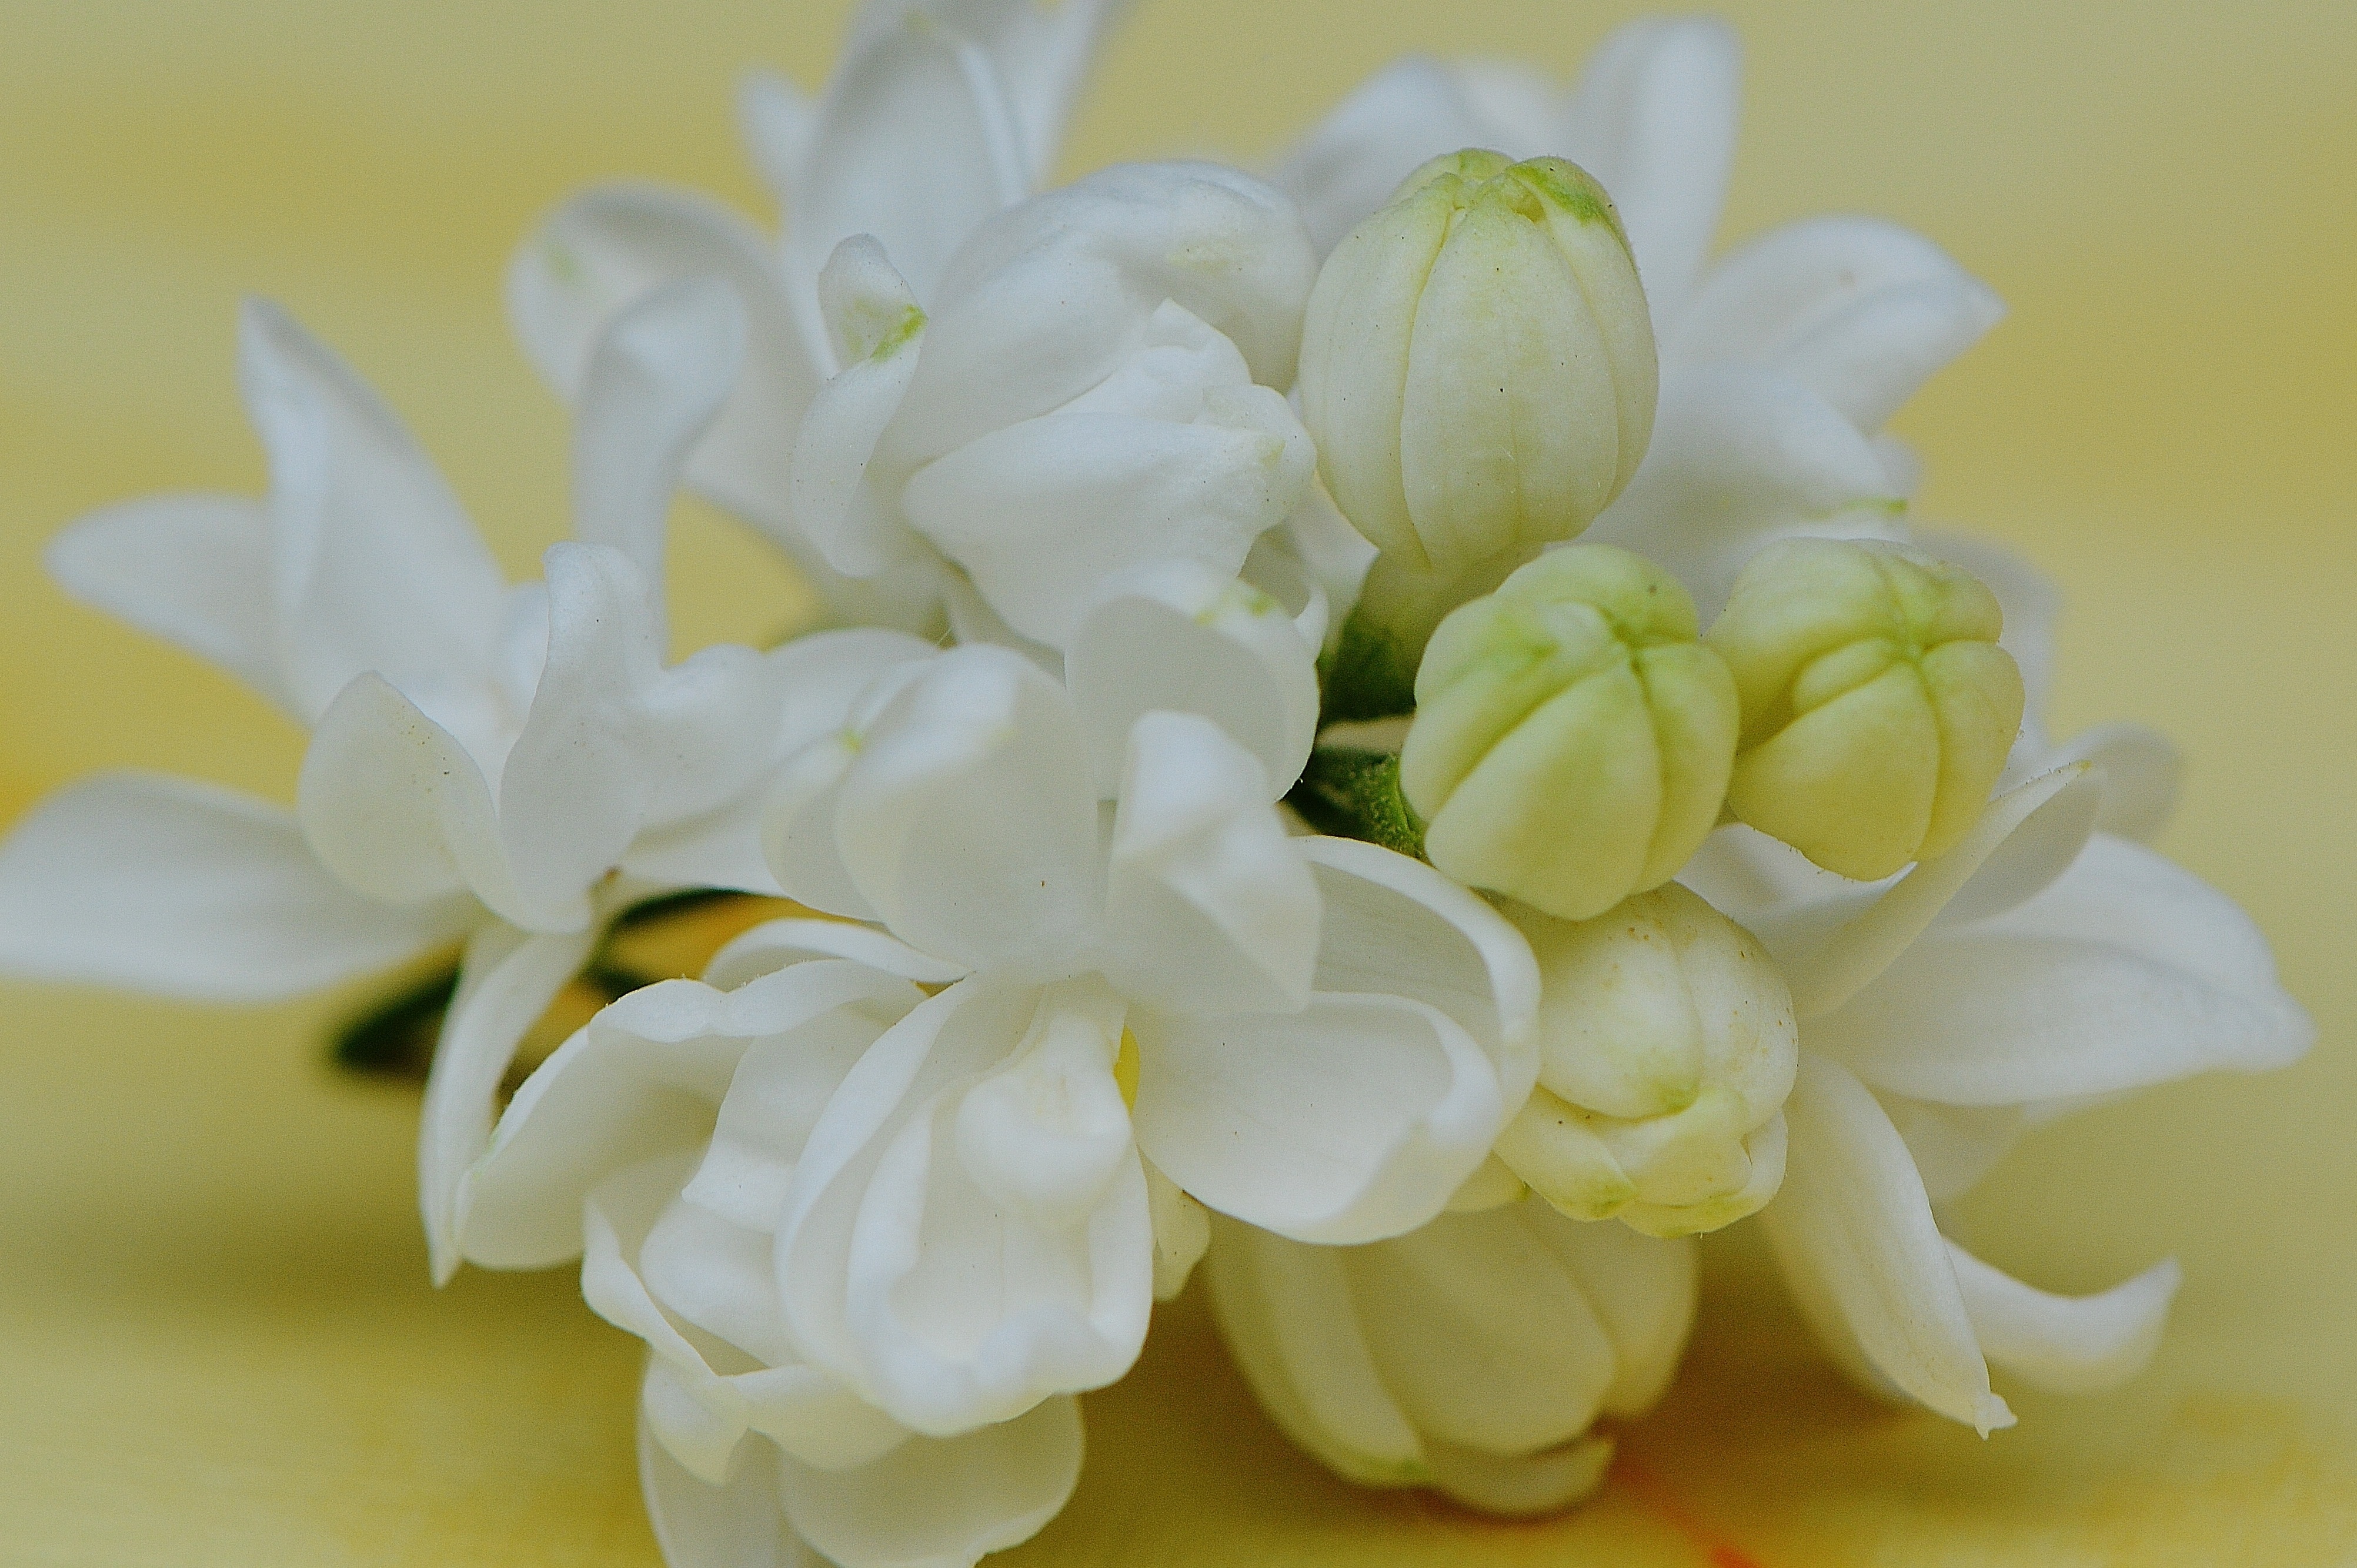 white clustered flowers